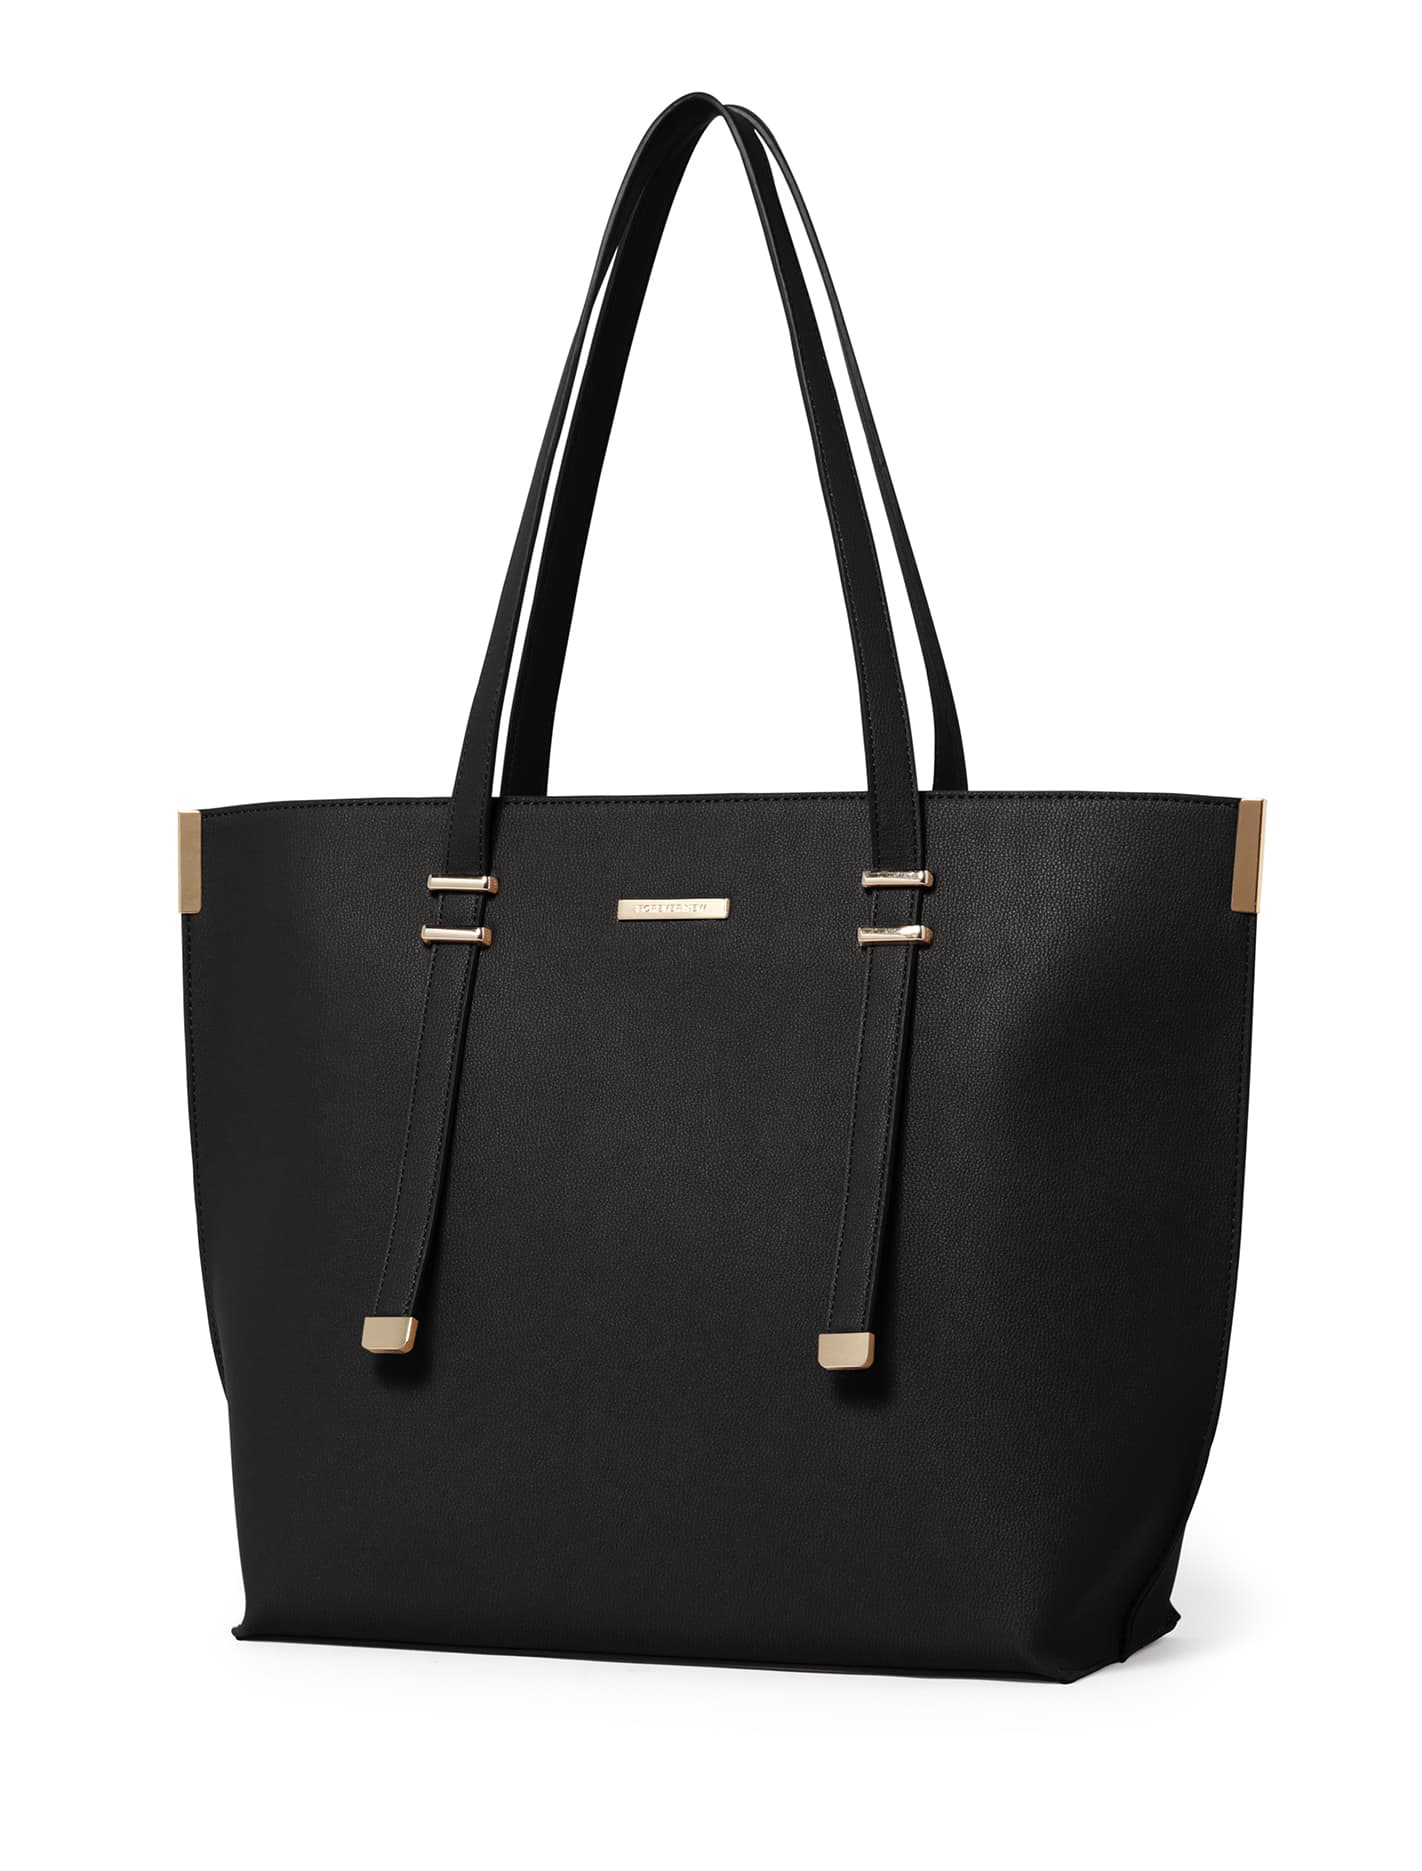 Nora Tote Bag Black | Forever New – Forever New South Africa